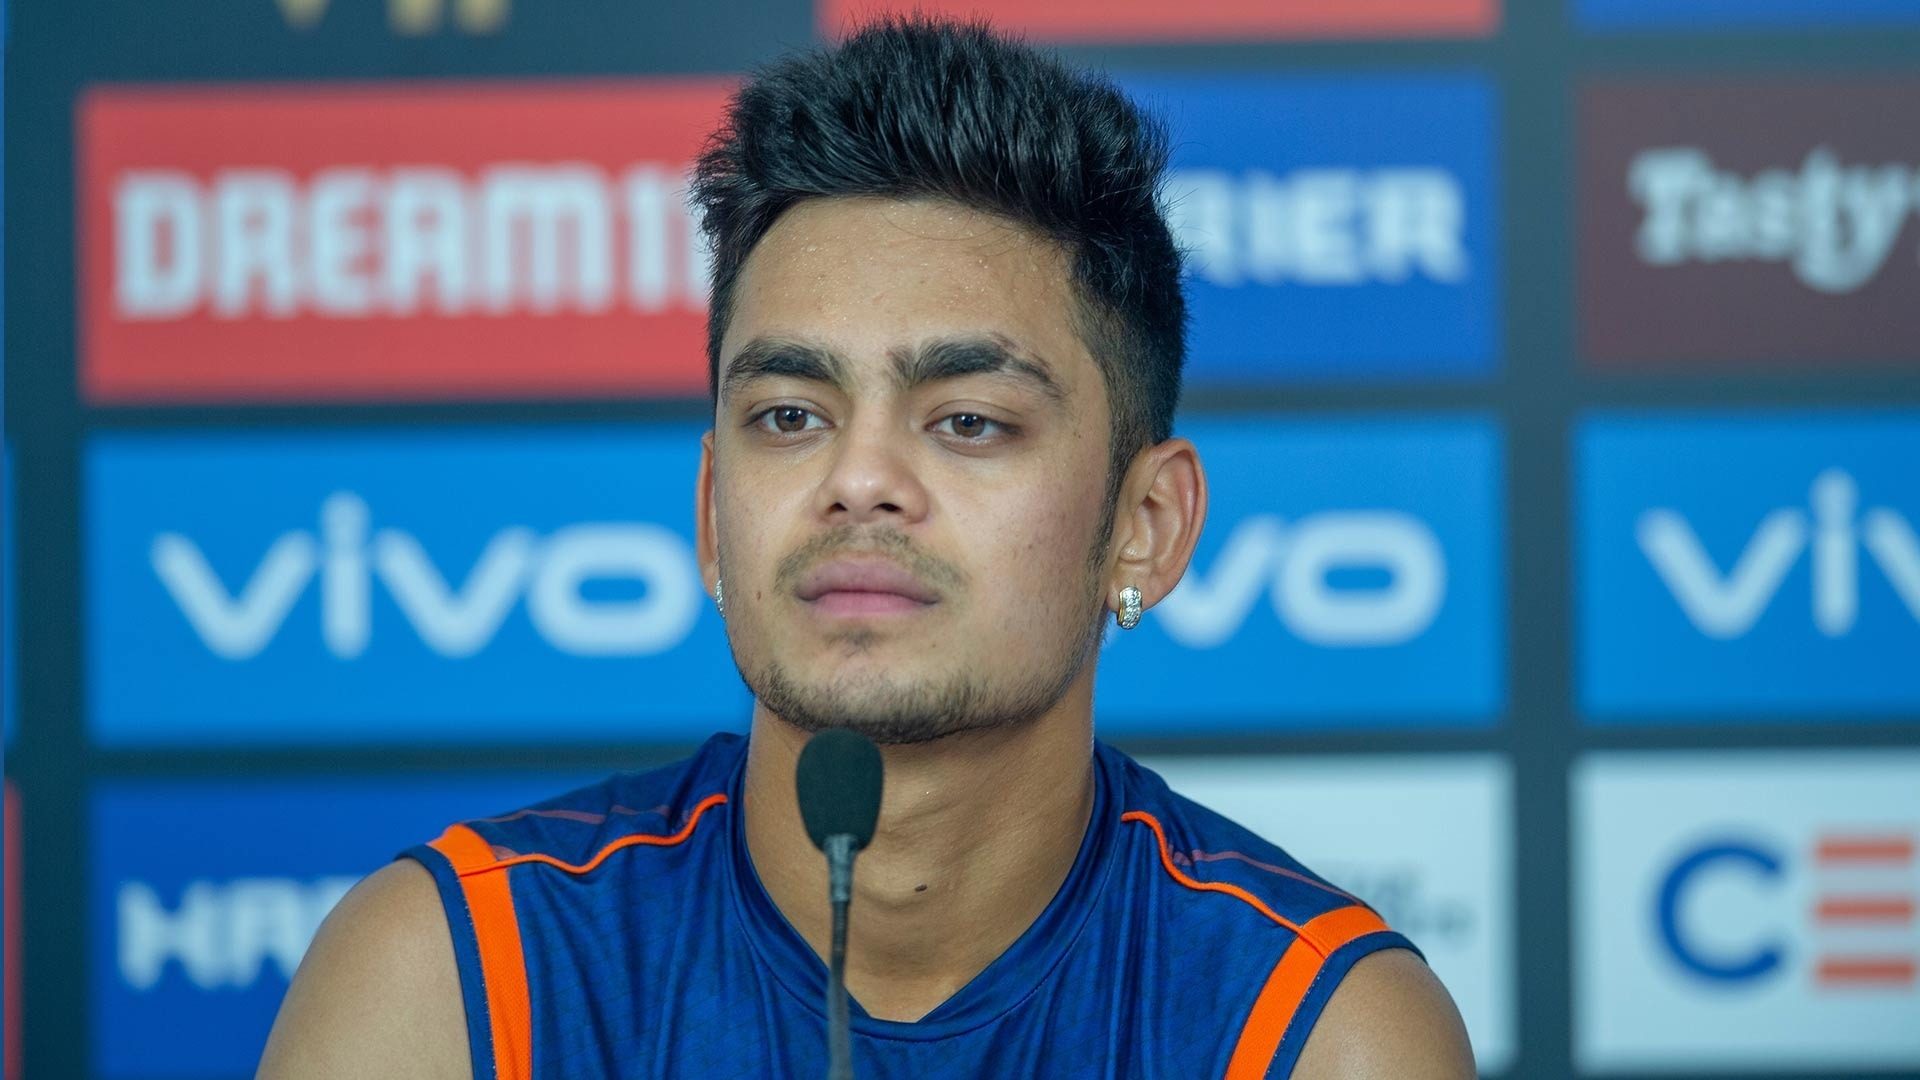 IPL 2020: As MI lost to Kohli's RCB, here's why Ishan Kishan did not bat in  Super Over for Mumbai